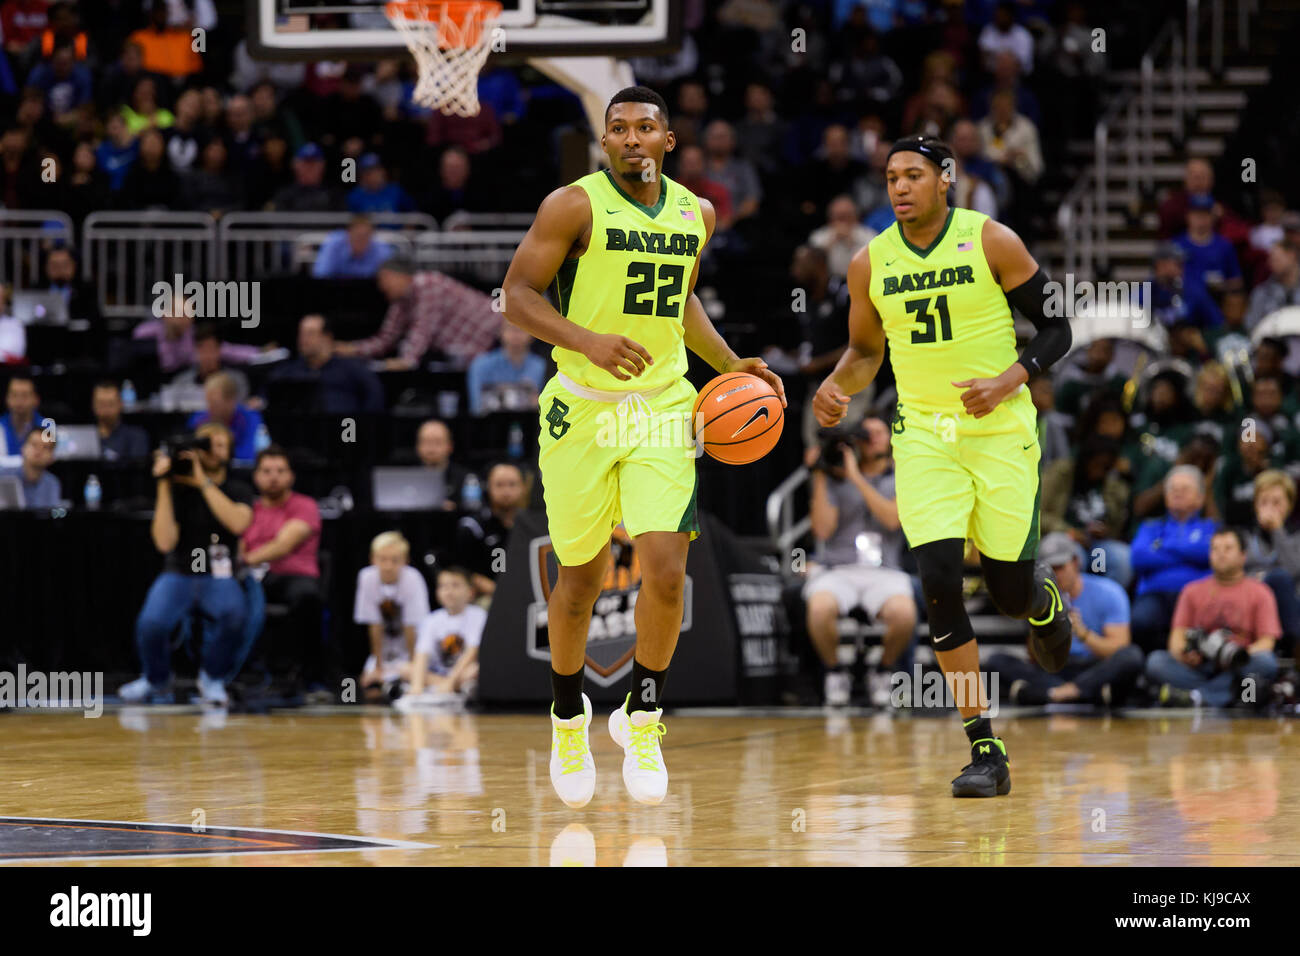 Kansas City, MO. U.S. 21st Nov, 2017. Baylor Bears guard King McClure #22 in action during the Hall of Fame Classic men's basketball game between Baylor Bears and Creighton Bluejays at the Sprint Center in Kansas City, MO.Baylor won 65-59 .Michael Spomer/Cal Sport Media/Alamy Live News Stock Photo